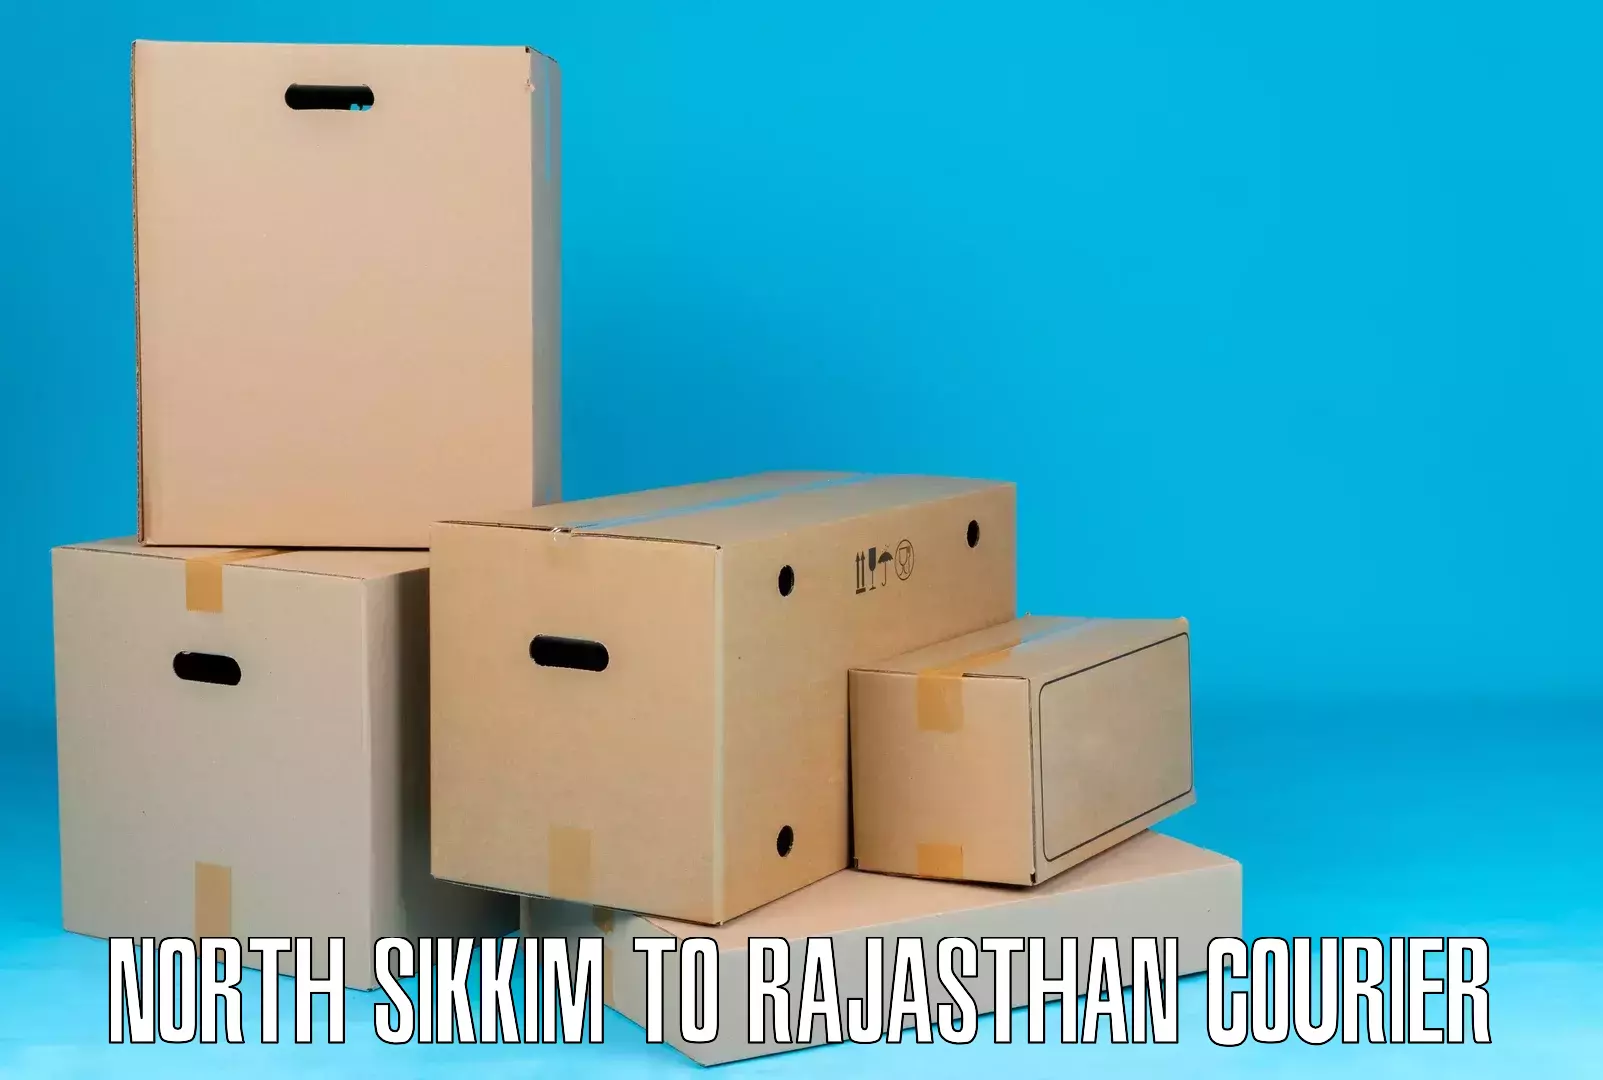 Delivery service partnership North Sikkim to Rajasthan